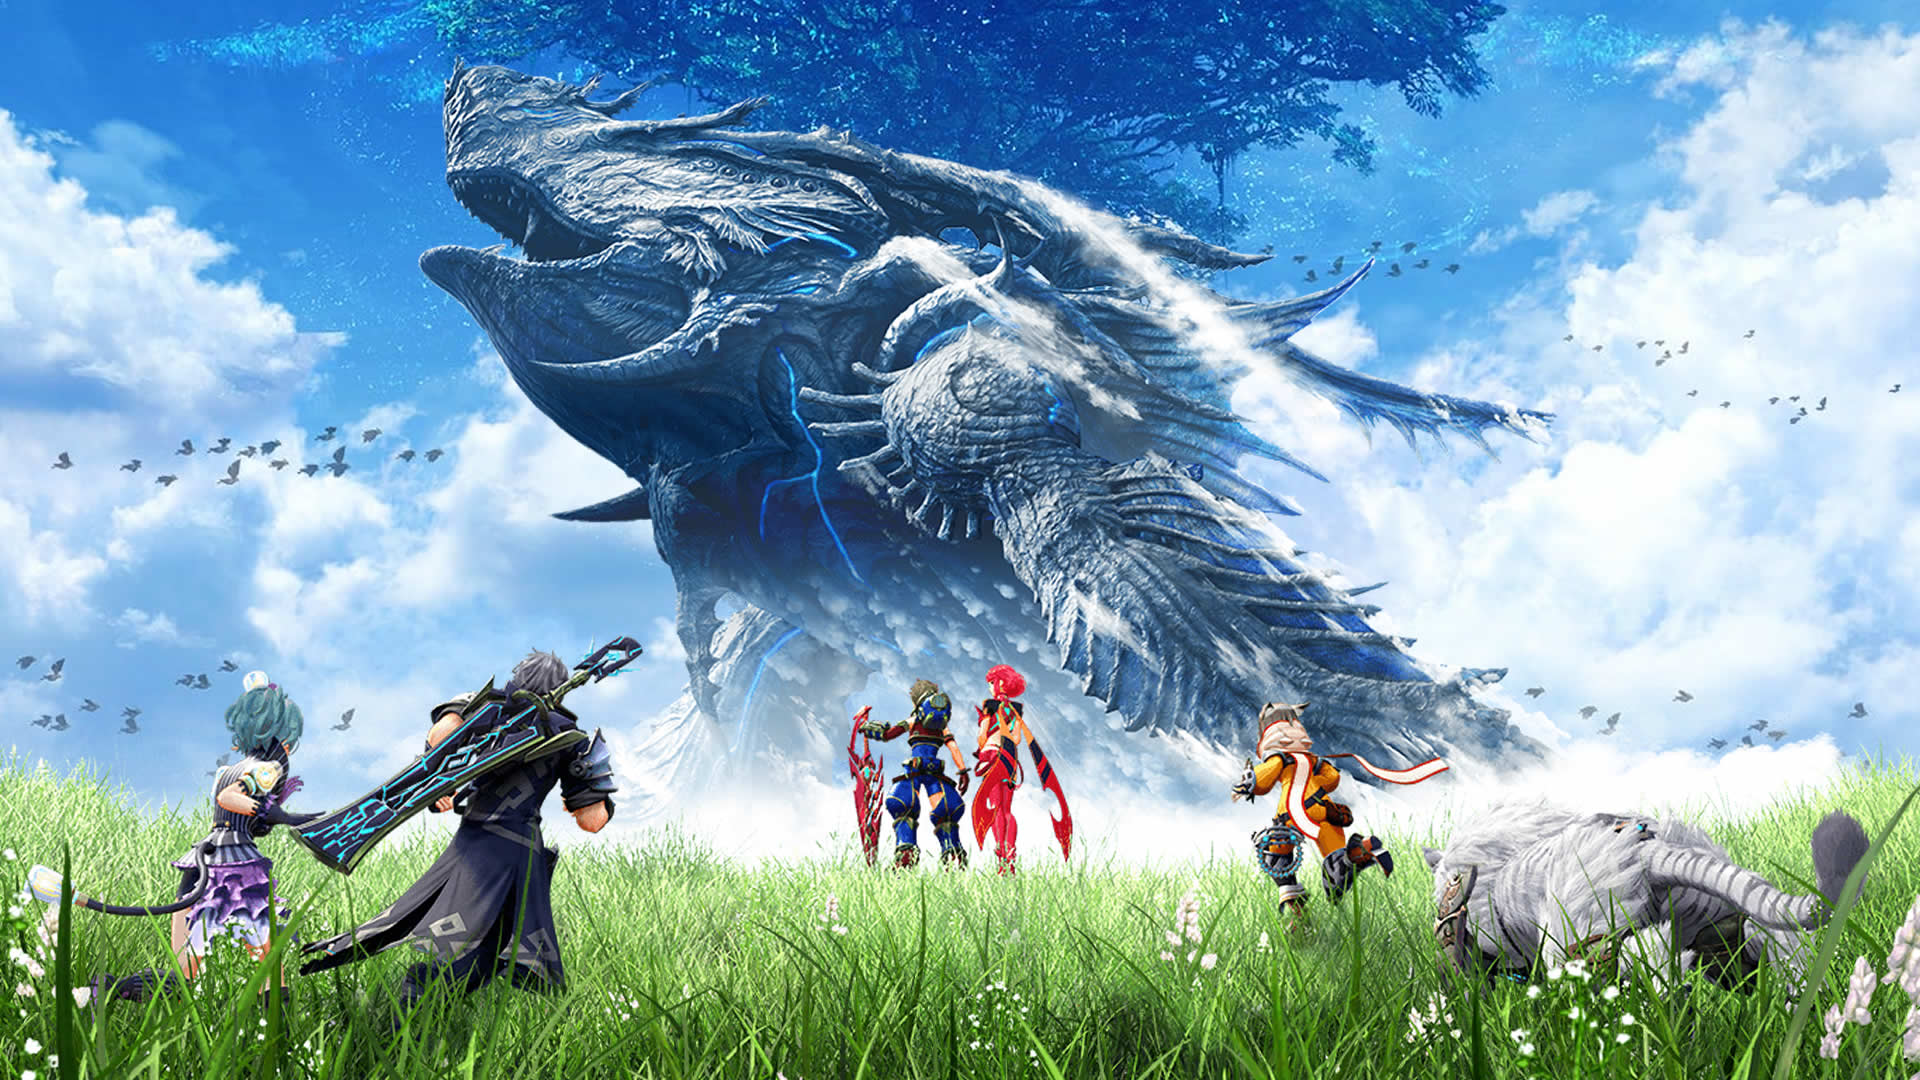 Xenoblade Chronicles 2 Wallpapers